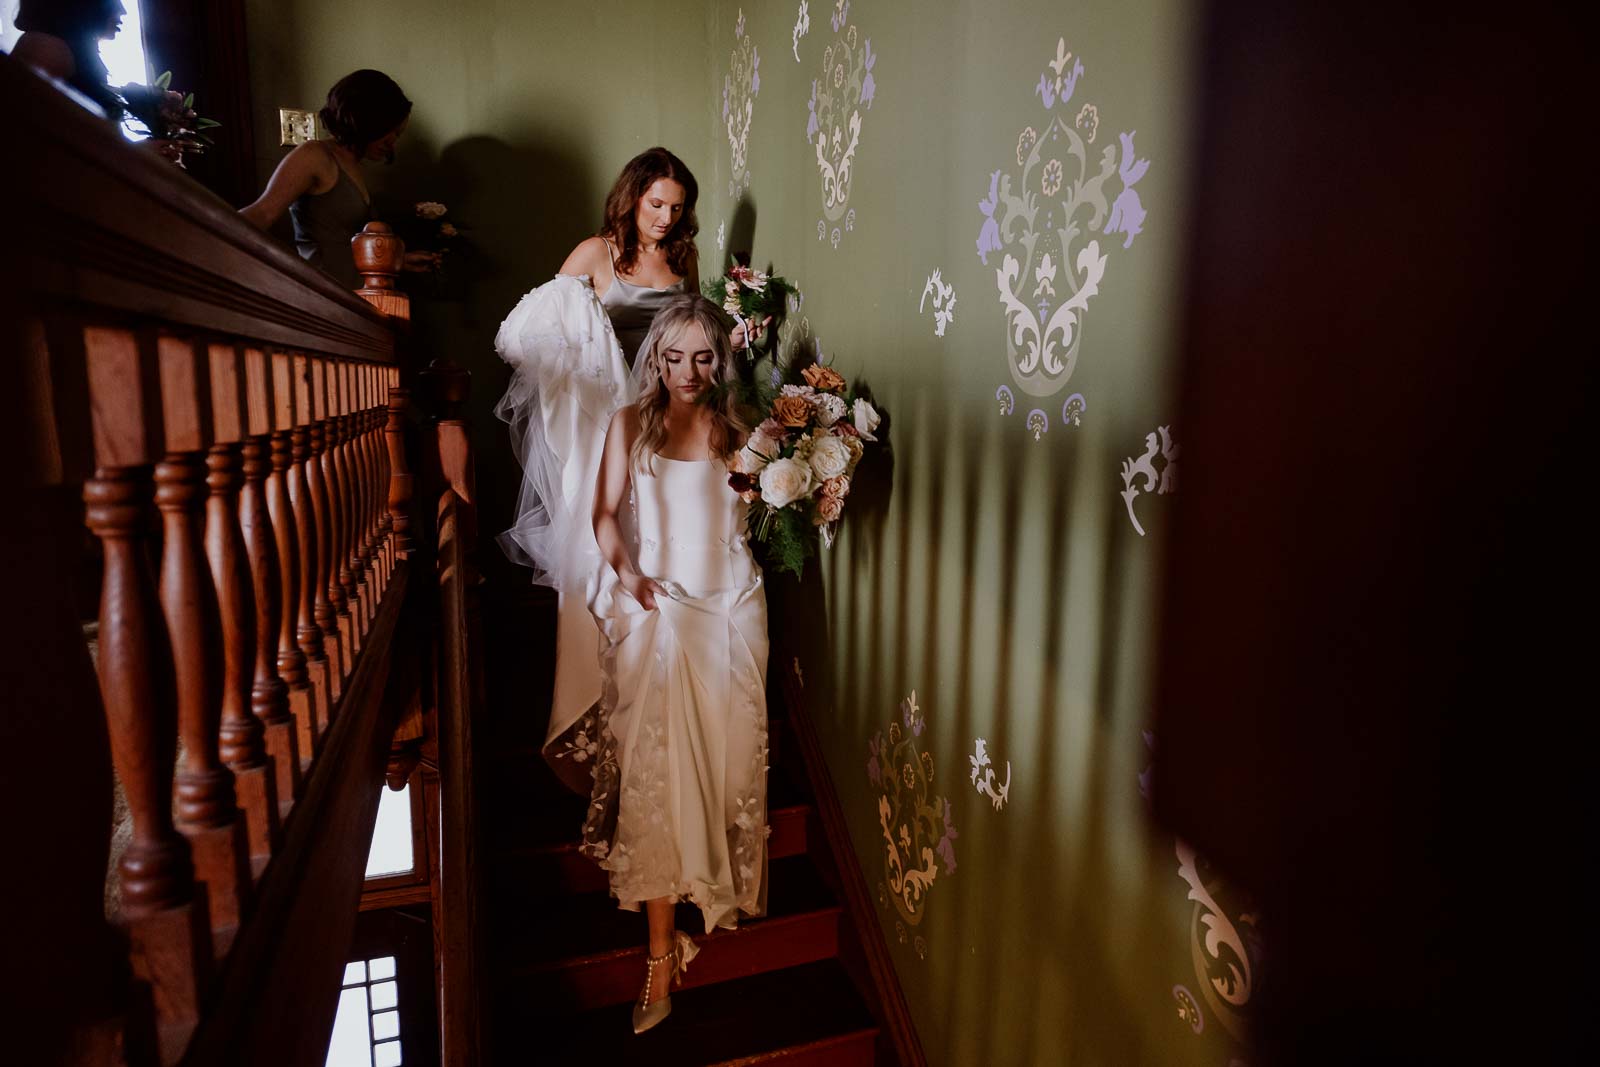 The bride leads the way down the old staircase at Barr Mansion